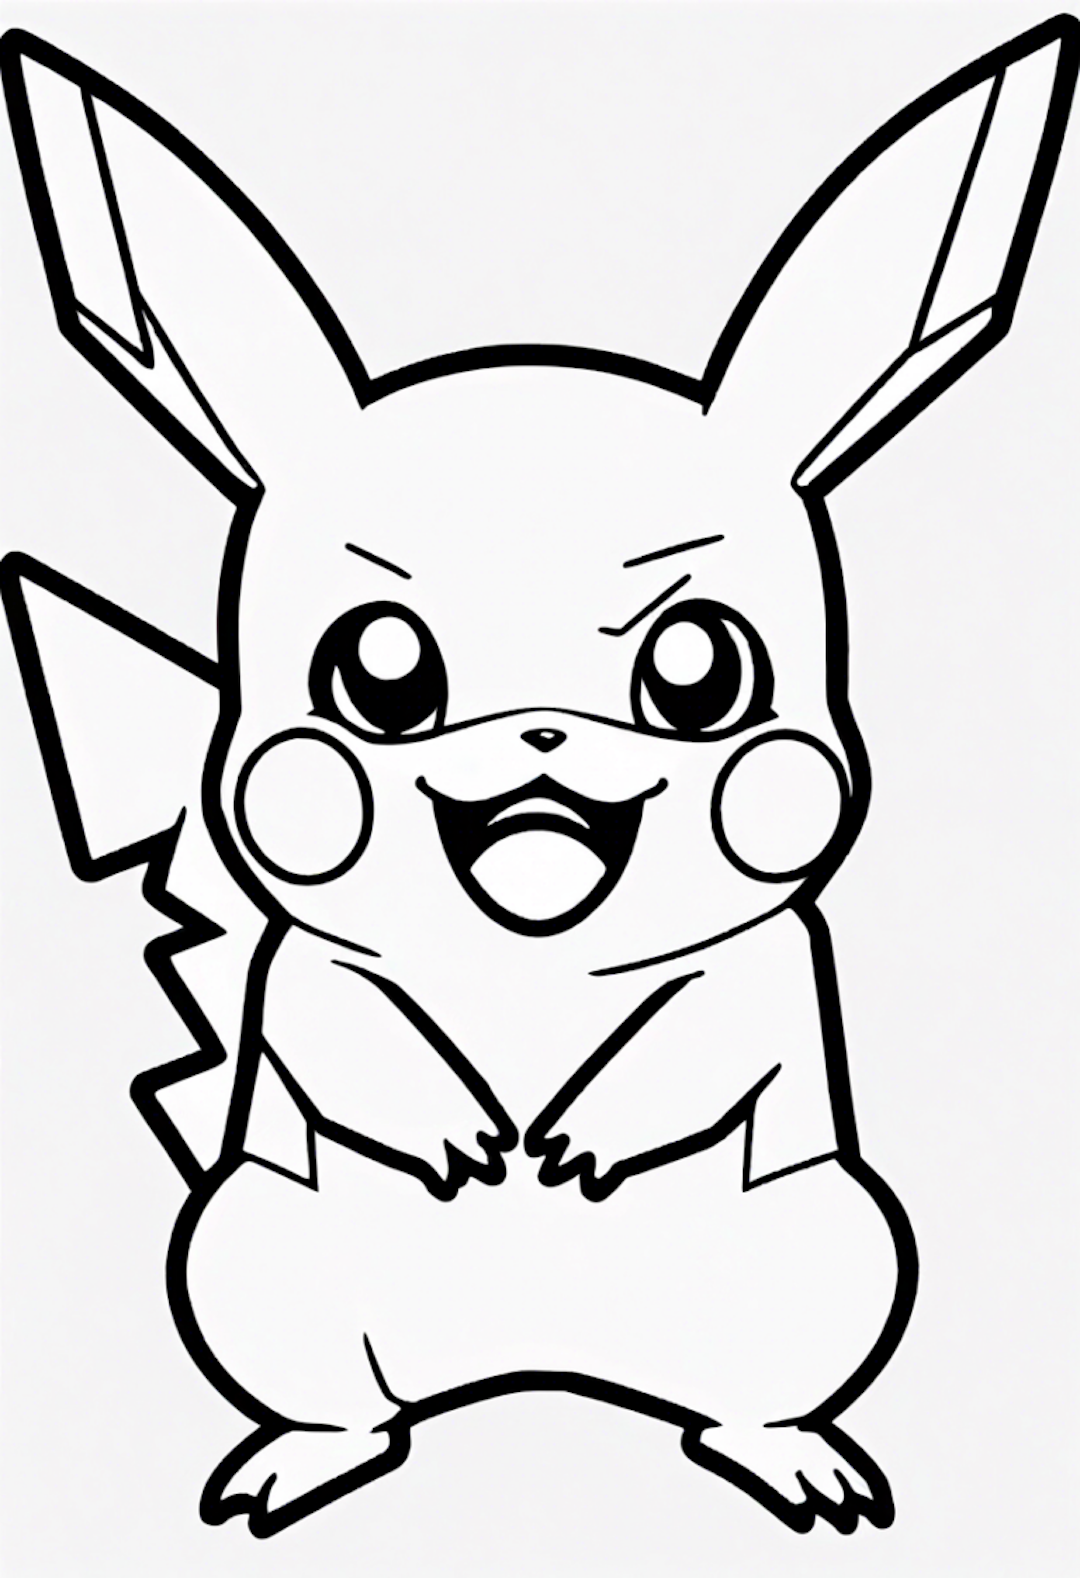 Pikachu Joyful Coloring Page coloring pages